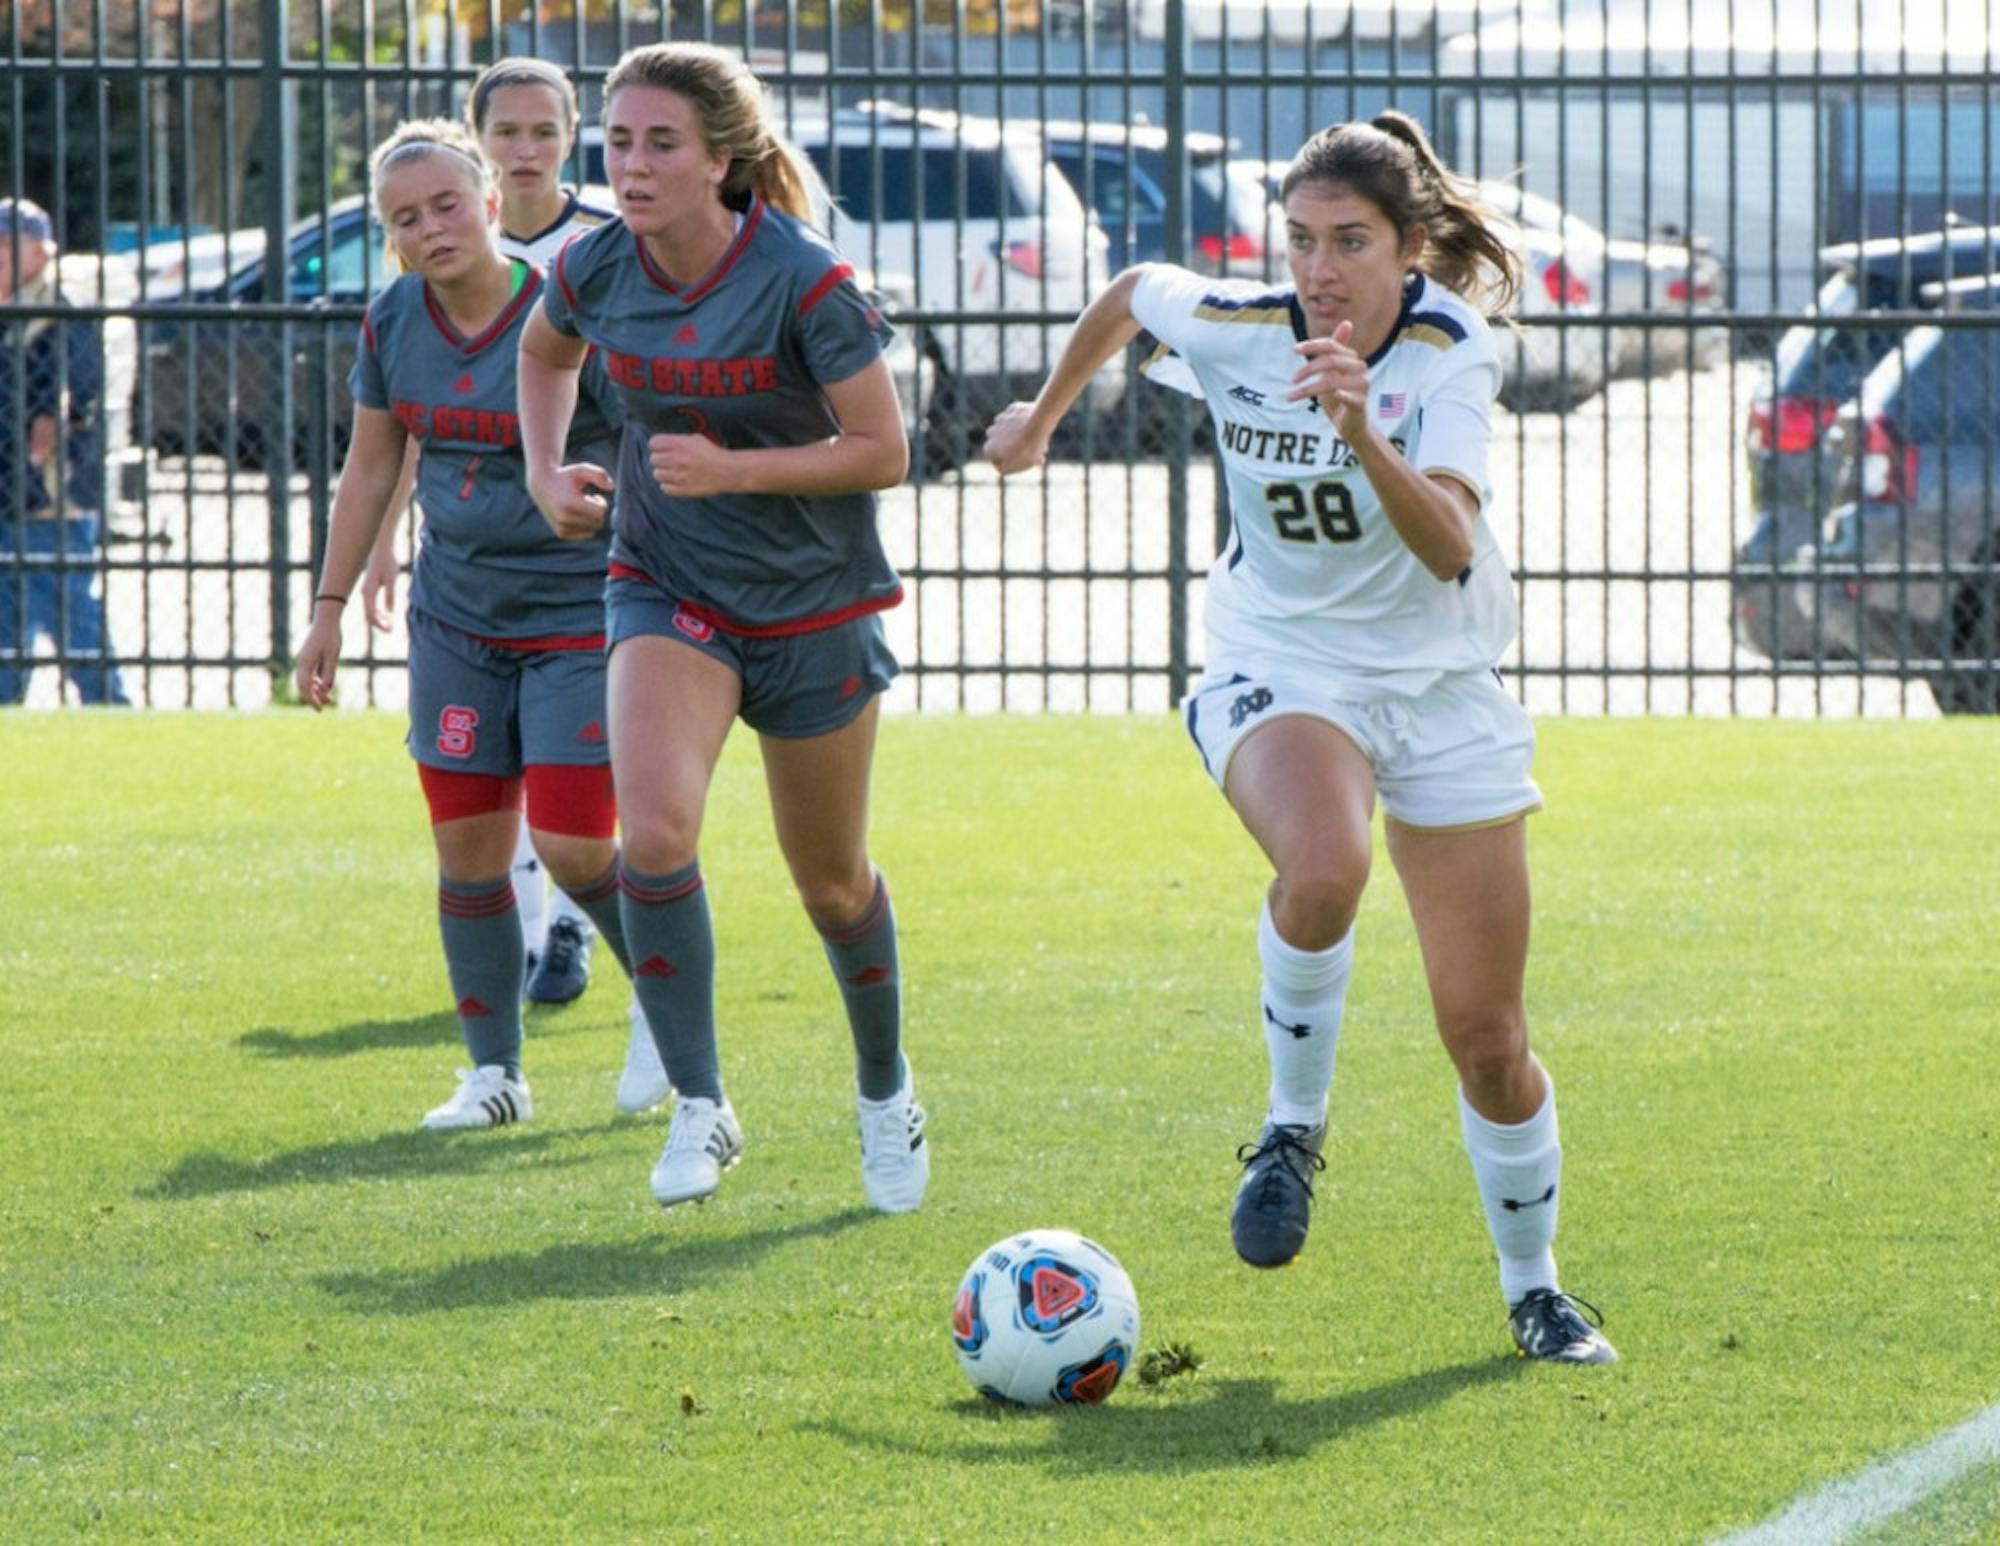 Irish junior forward Kaitlin Klawunder races down the sideline with the ball during Notre Dame’s 1-0 win over NC State on Sunday at Alumni Stadium. Klawunder sealed the win for the Irish by scoring the game’s only goal.